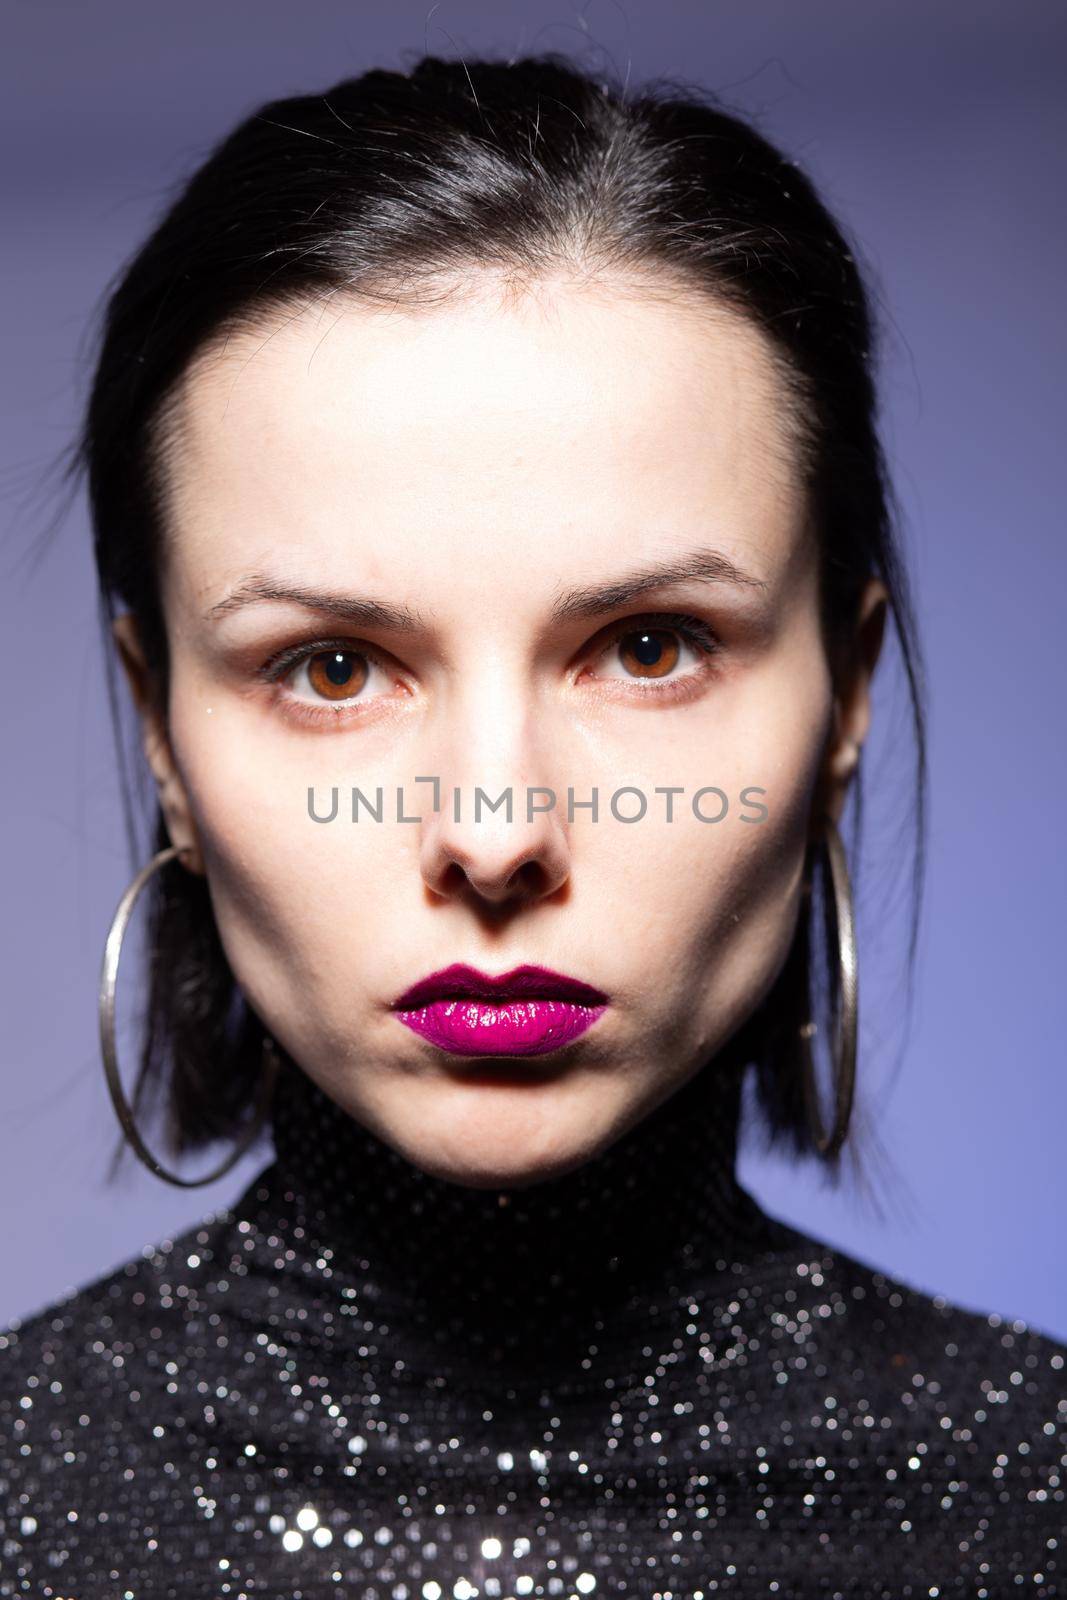 woman with purple lips in a black turtleneck with sequins on a blue background by shilovskaya